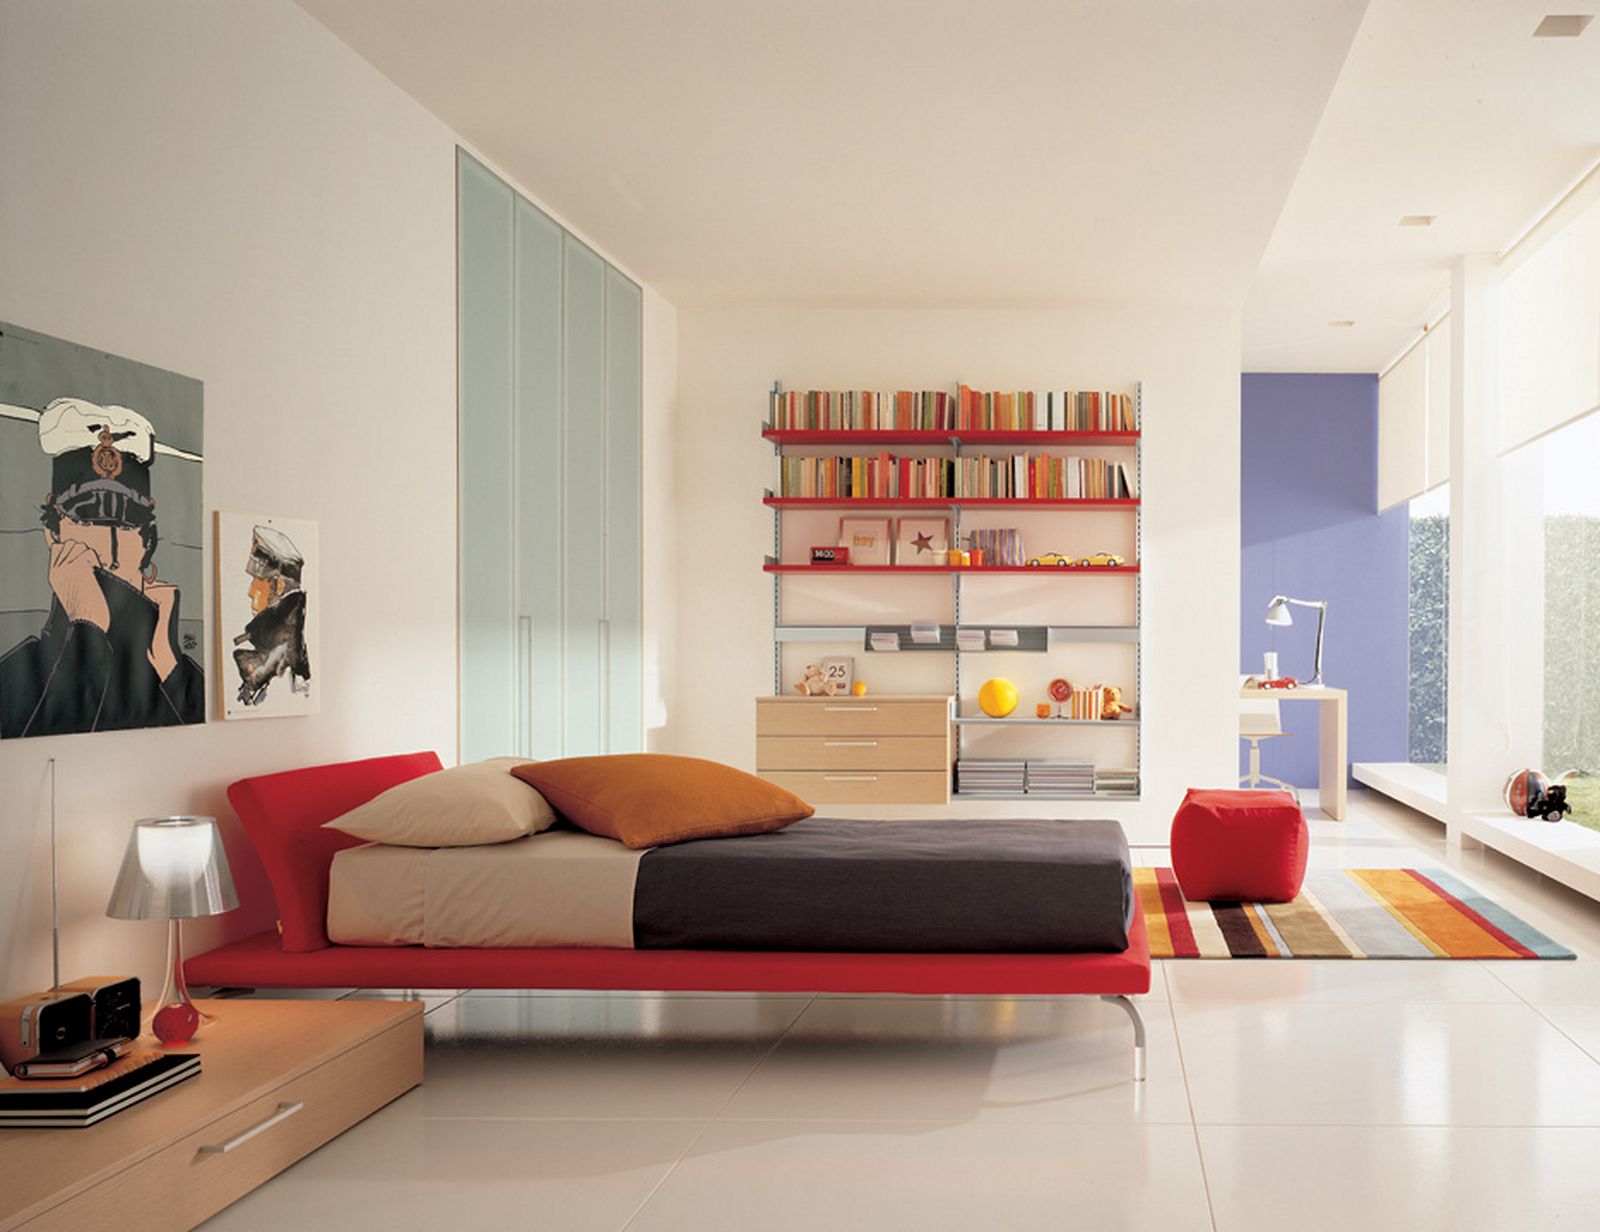 Room Paint With Boys Room Paint Ideas Decorated With White Wall Color Completed With Red Bed Frame Ideas In Modern Style For Inspiration Kids Room Boys Room Paint Ideas For Adventurous Imagination